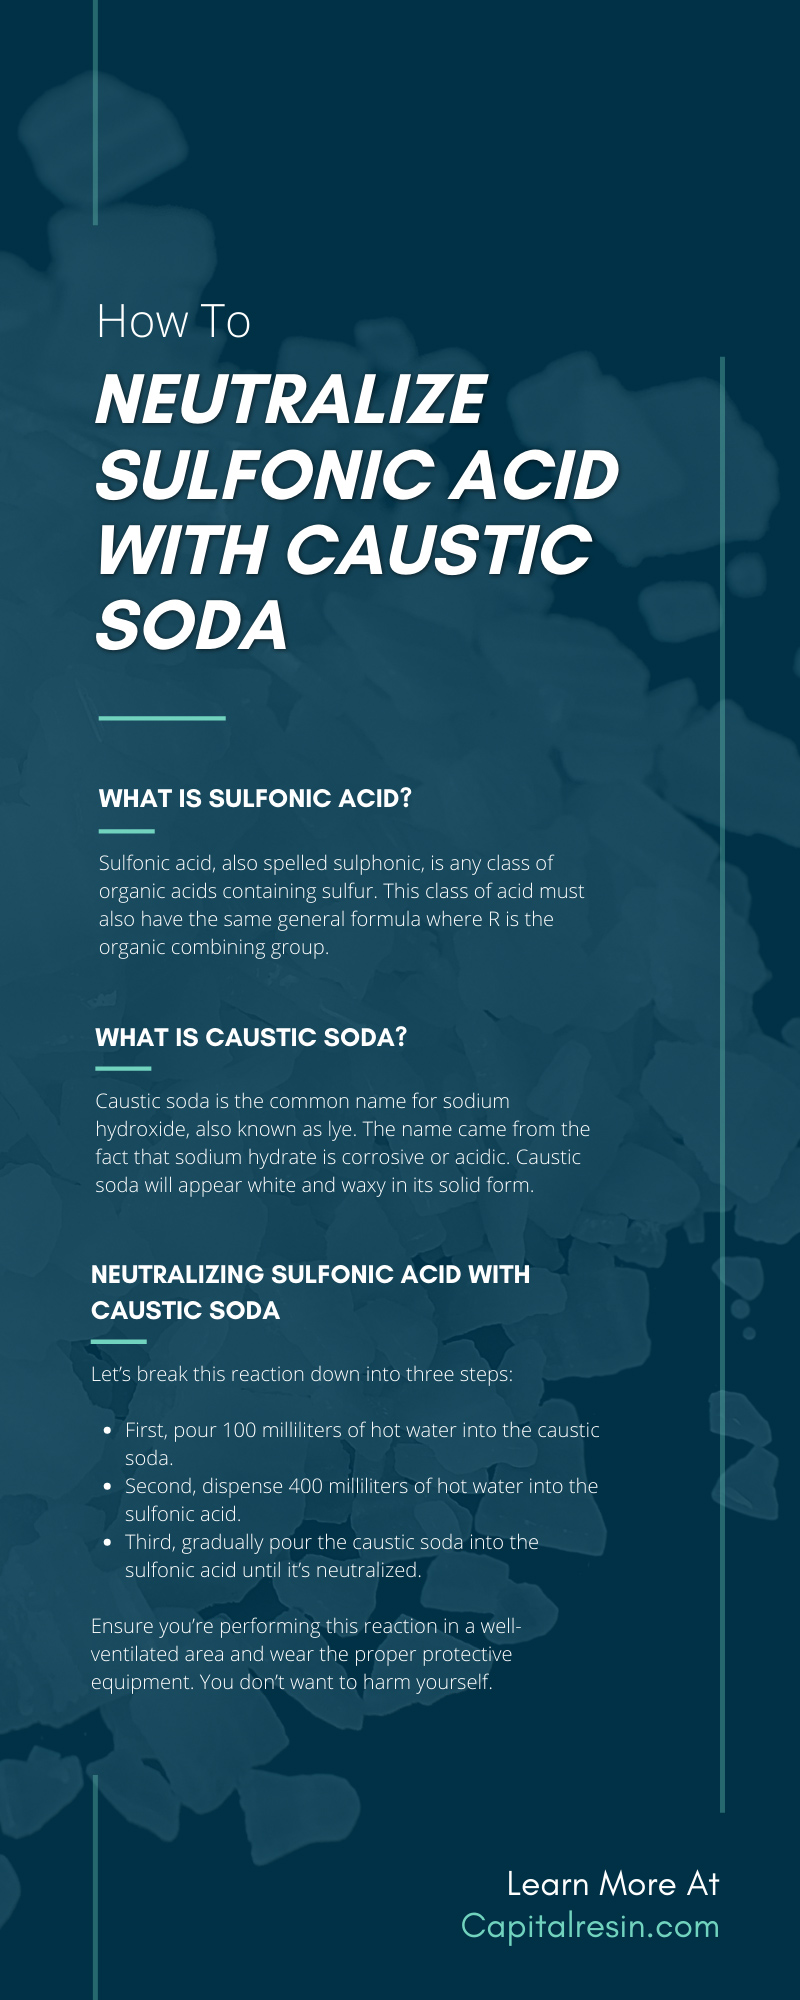 How To Neutralize Sulfonic Acid With Caustic Soda